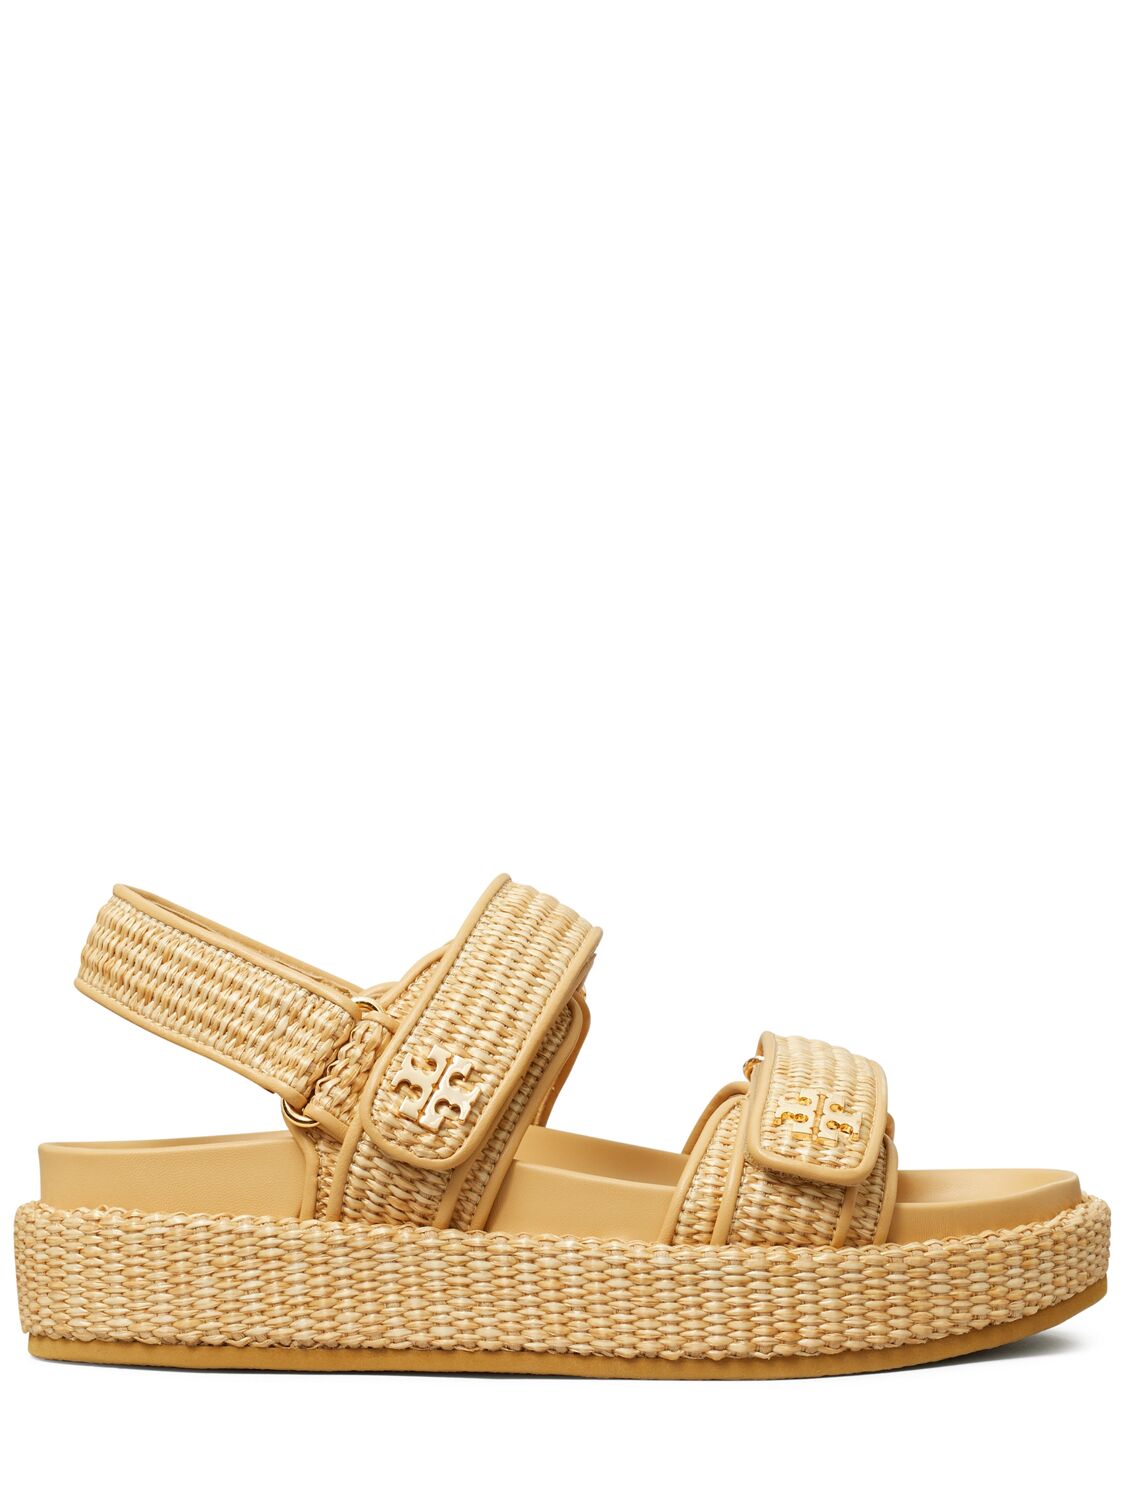 Tory Burch 30mm Kira Leather Sandals In Natural